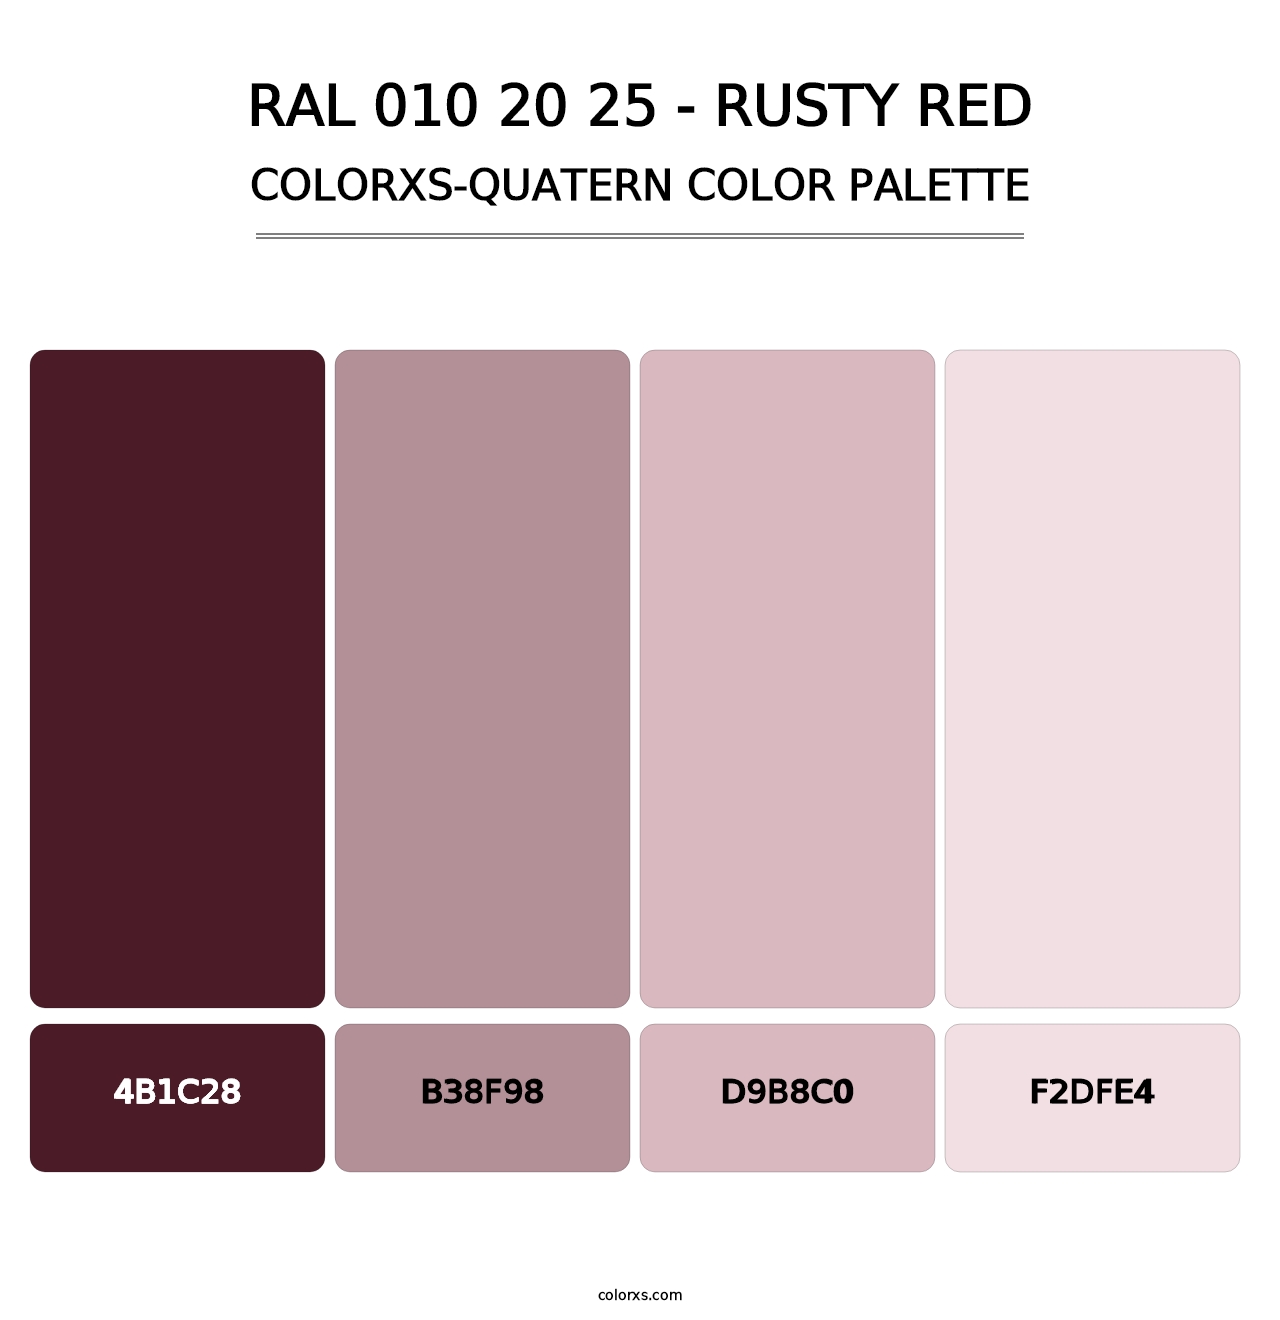 RAL 010 20 25 - Rusty Red - Colorxs Quatern Palette